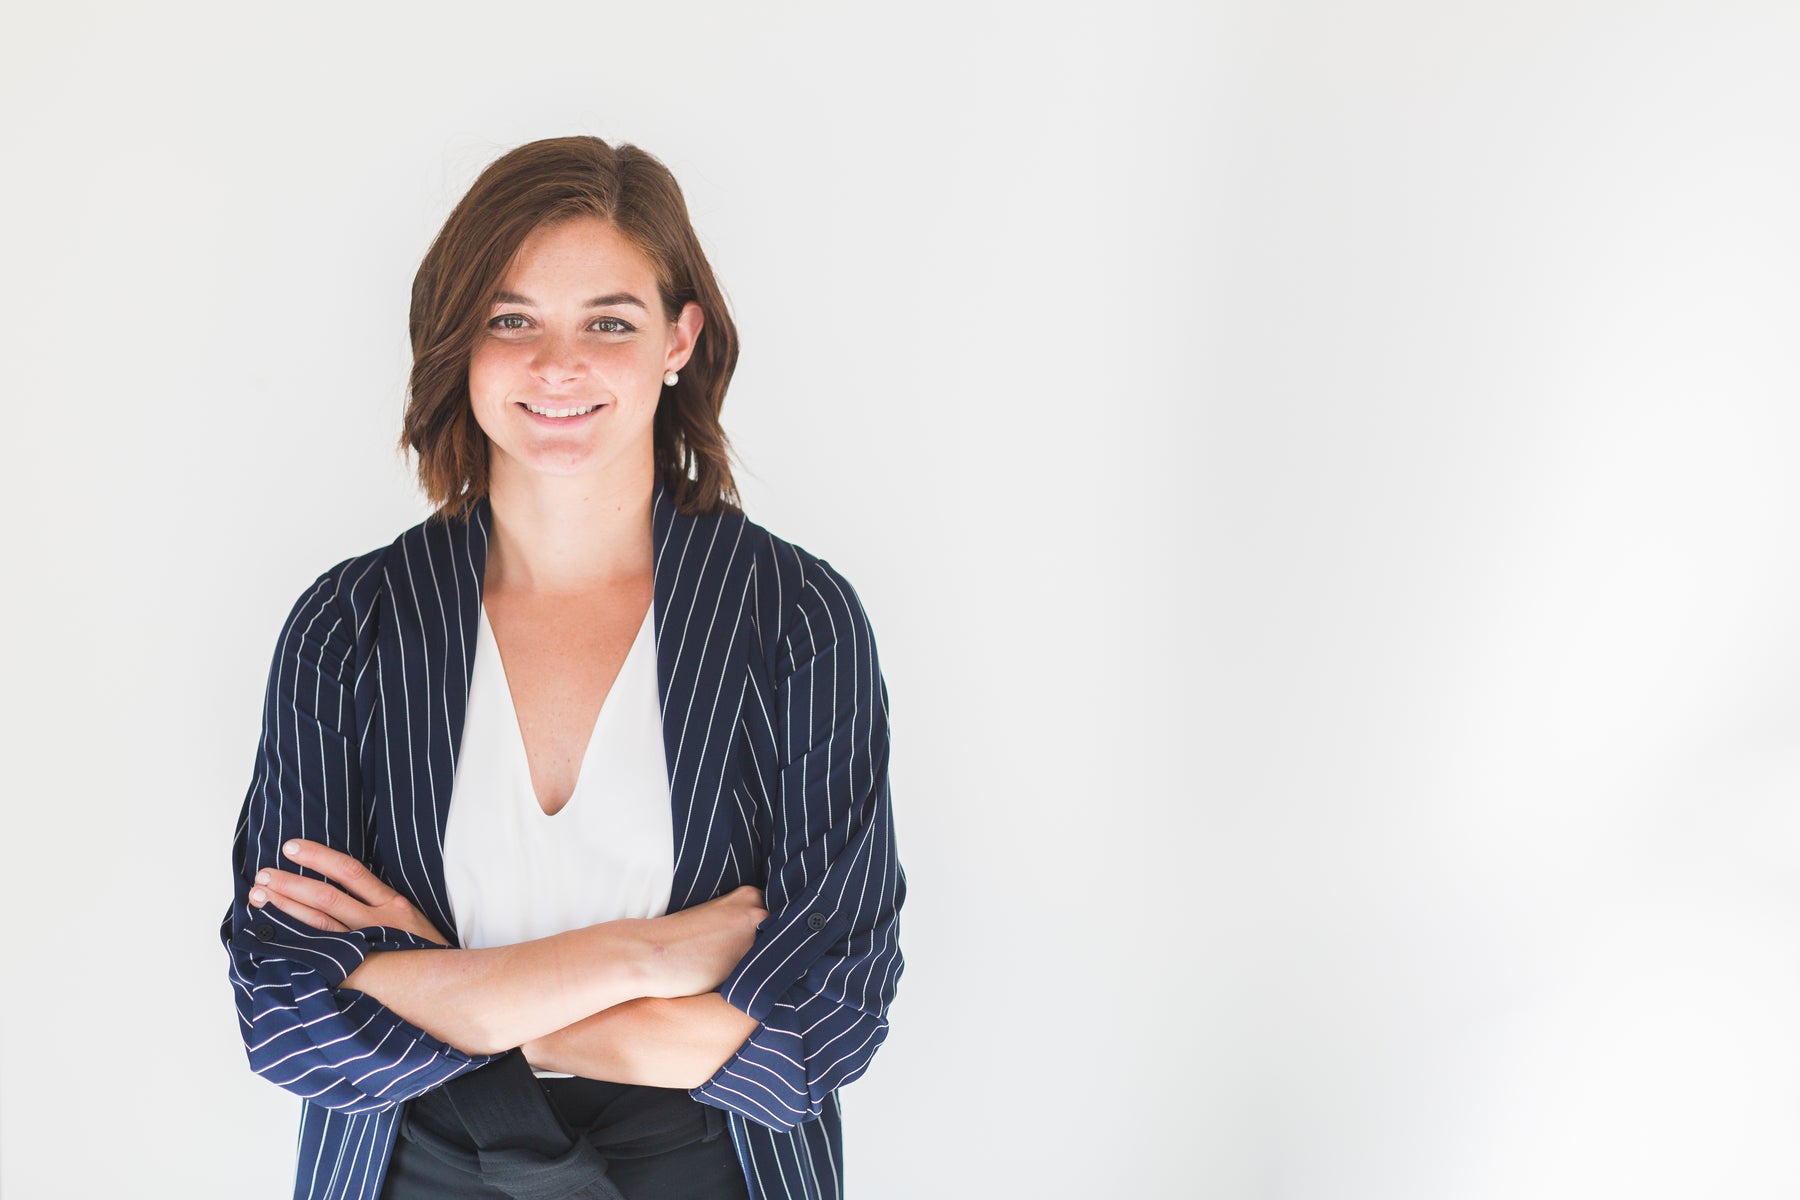 Photo of smiling young woman in business clothes with arms crossed